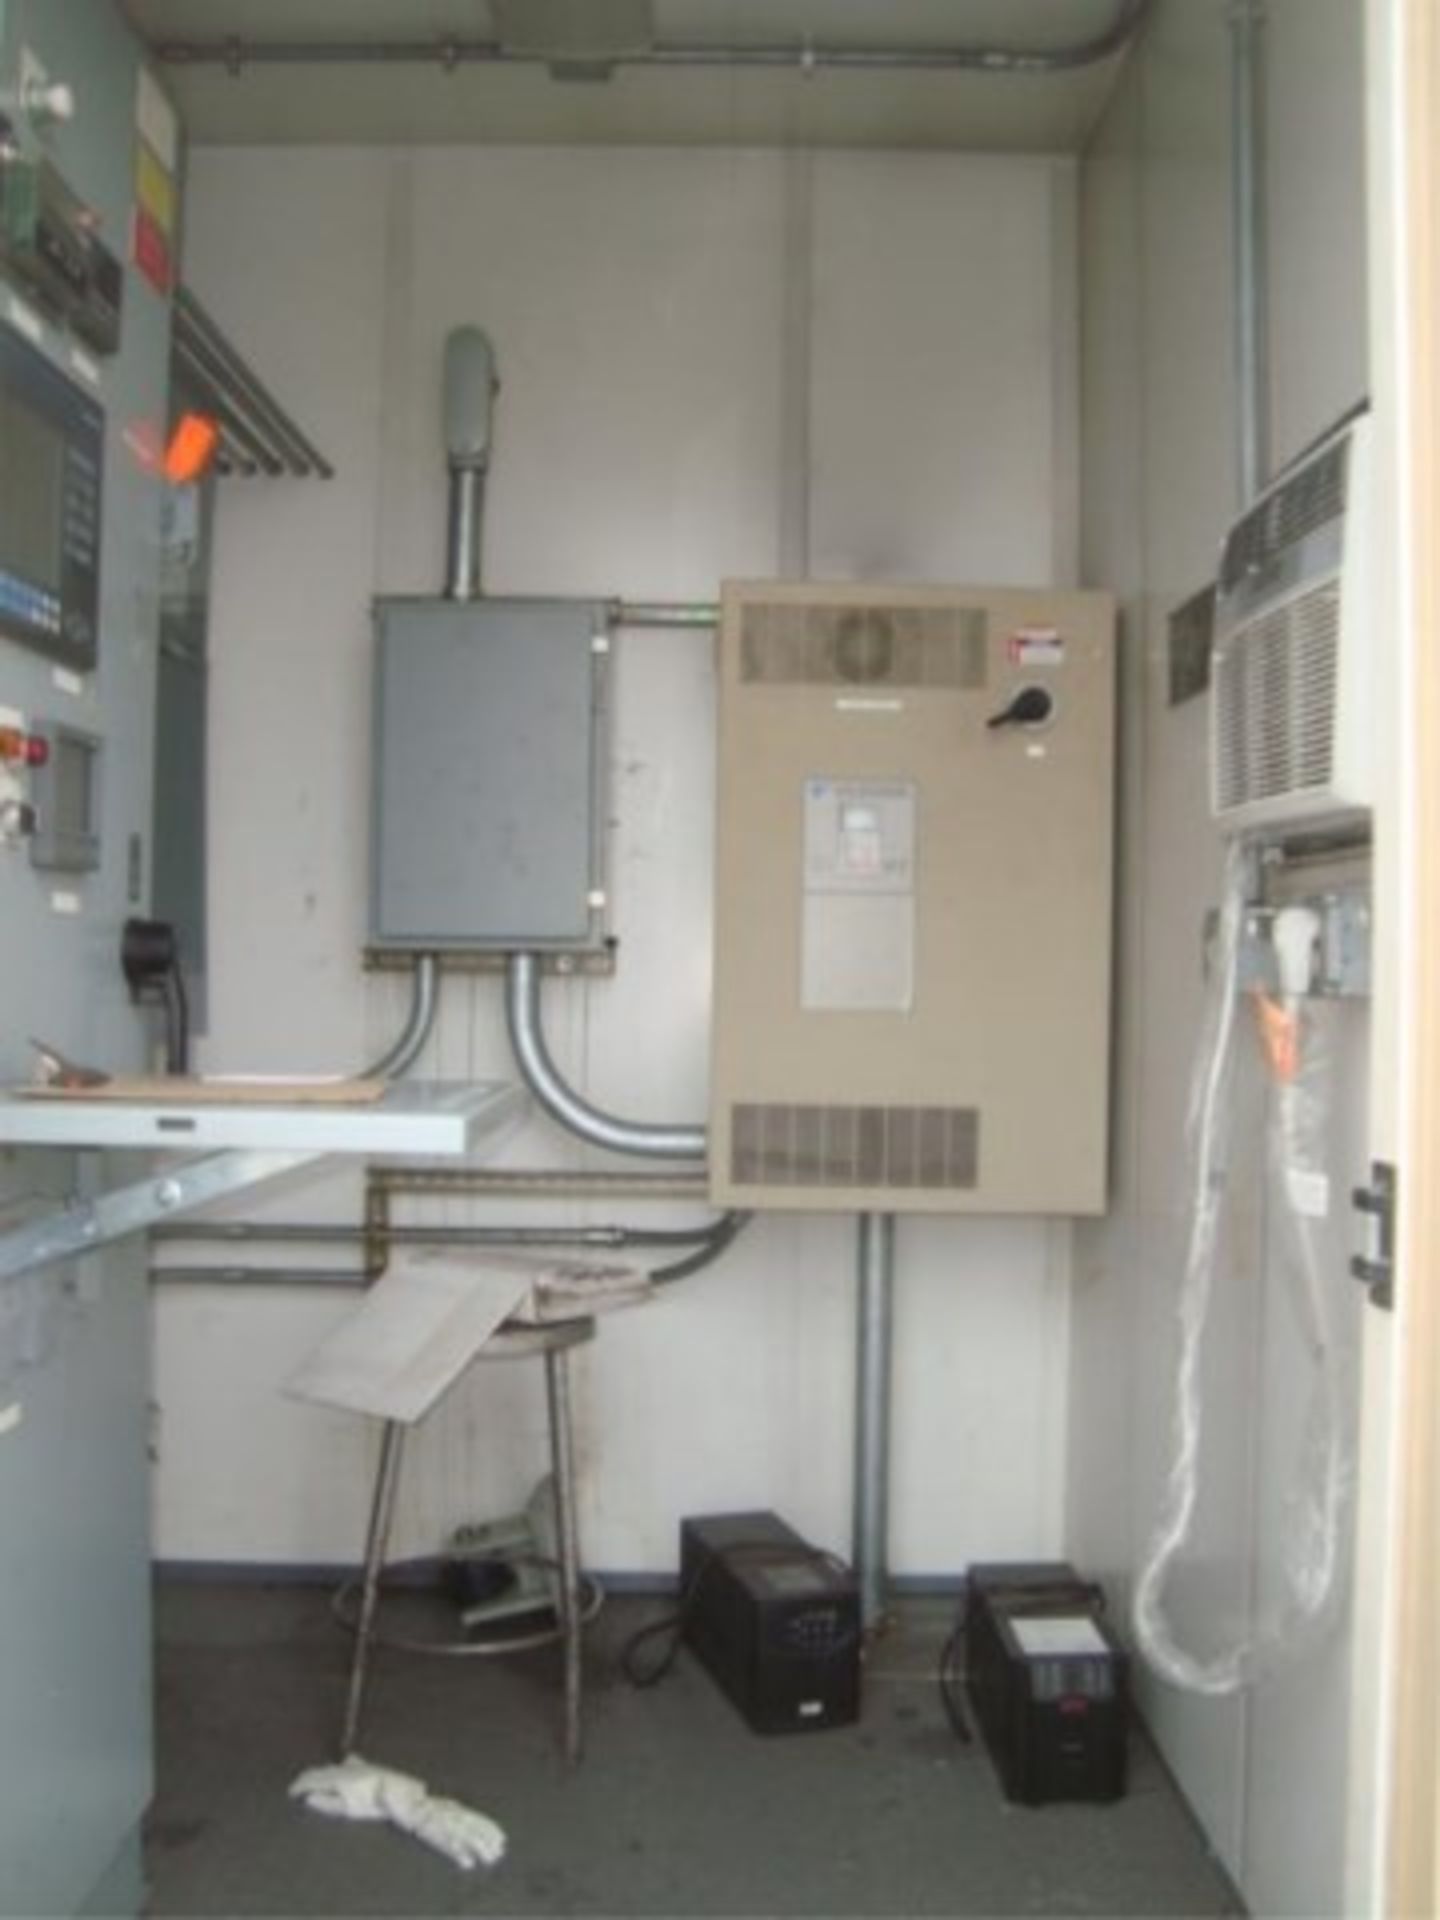 Reeco Re-Therm Fume Scrub Abatement System - Image 15 of 20